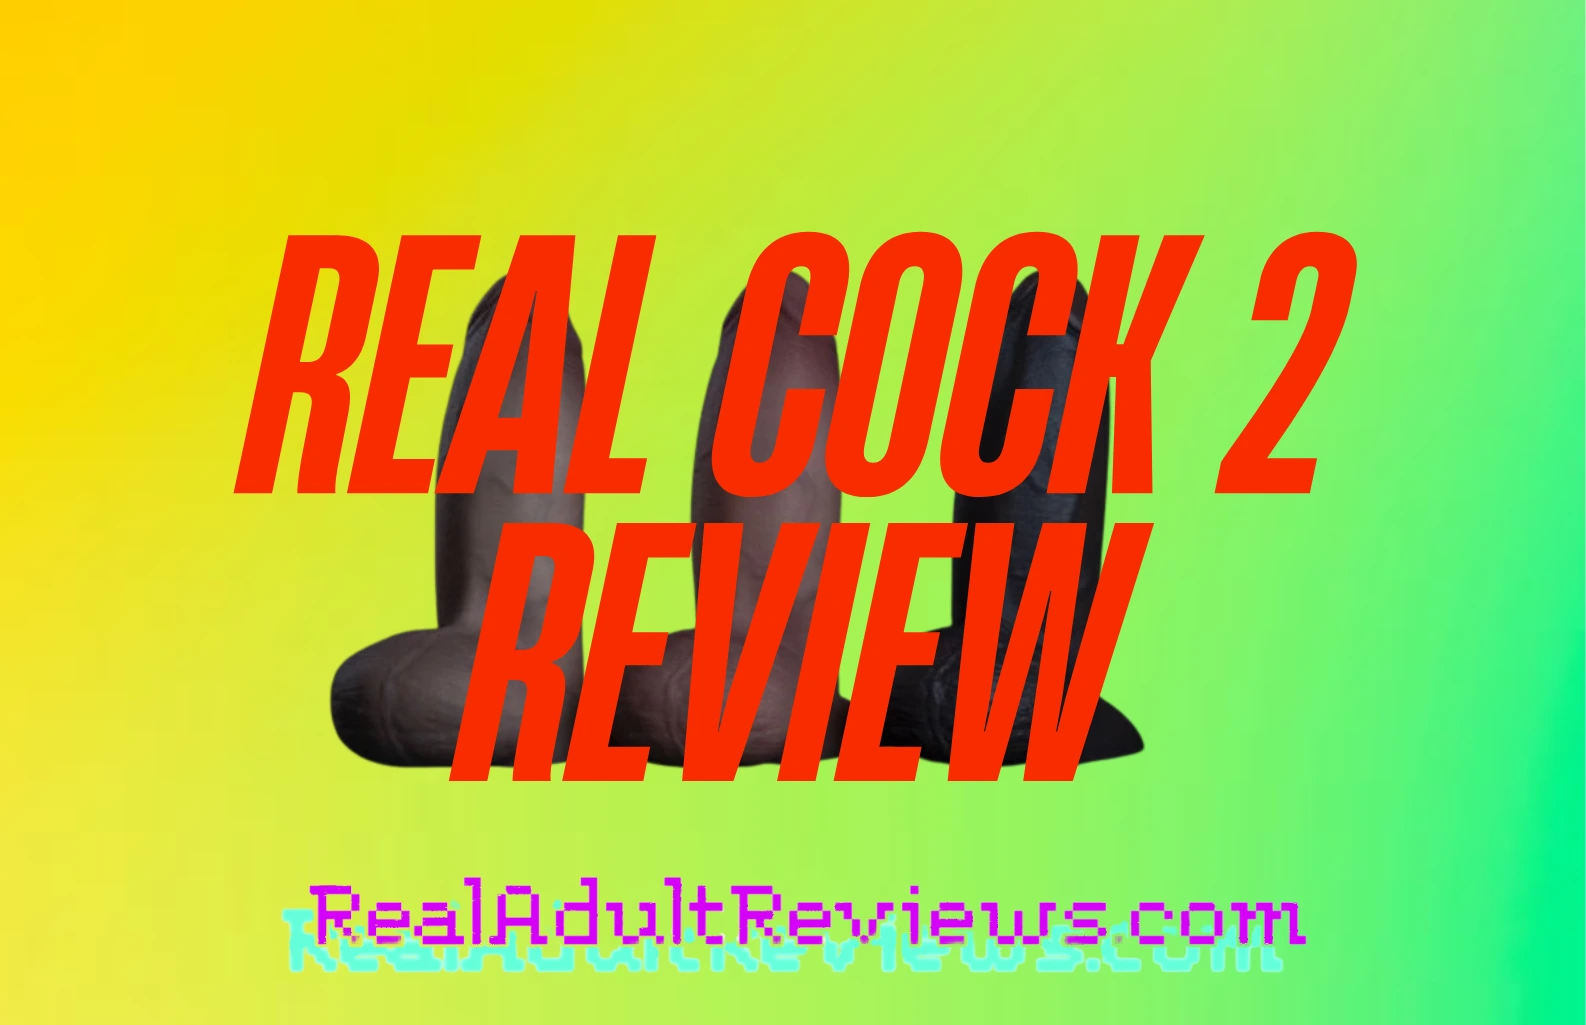 Honest Review of the Realcock 2 Dildo: Is This Most Realistic Sex Toy?